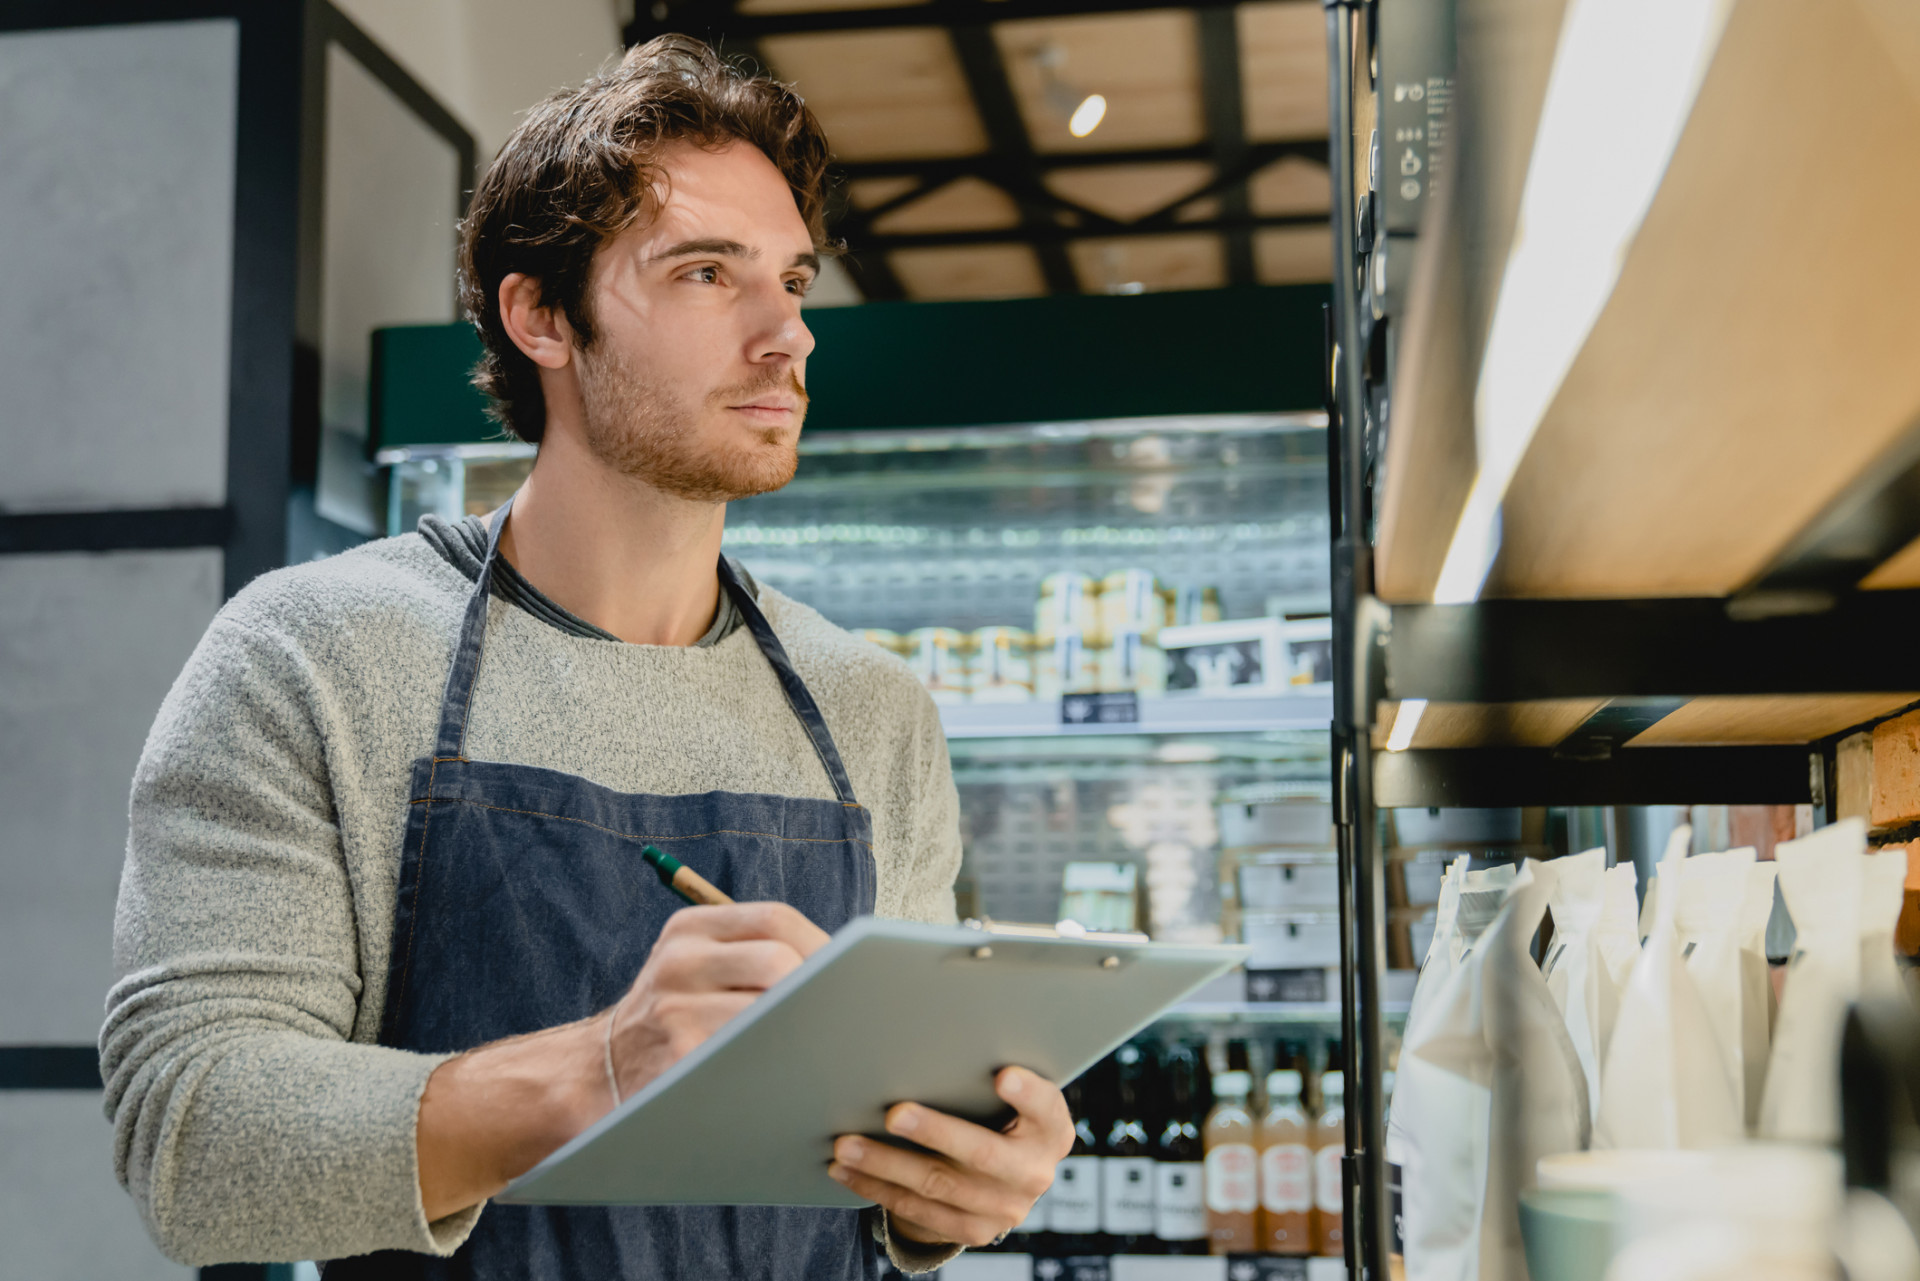  A restaurant automation system can help manage inventory levels